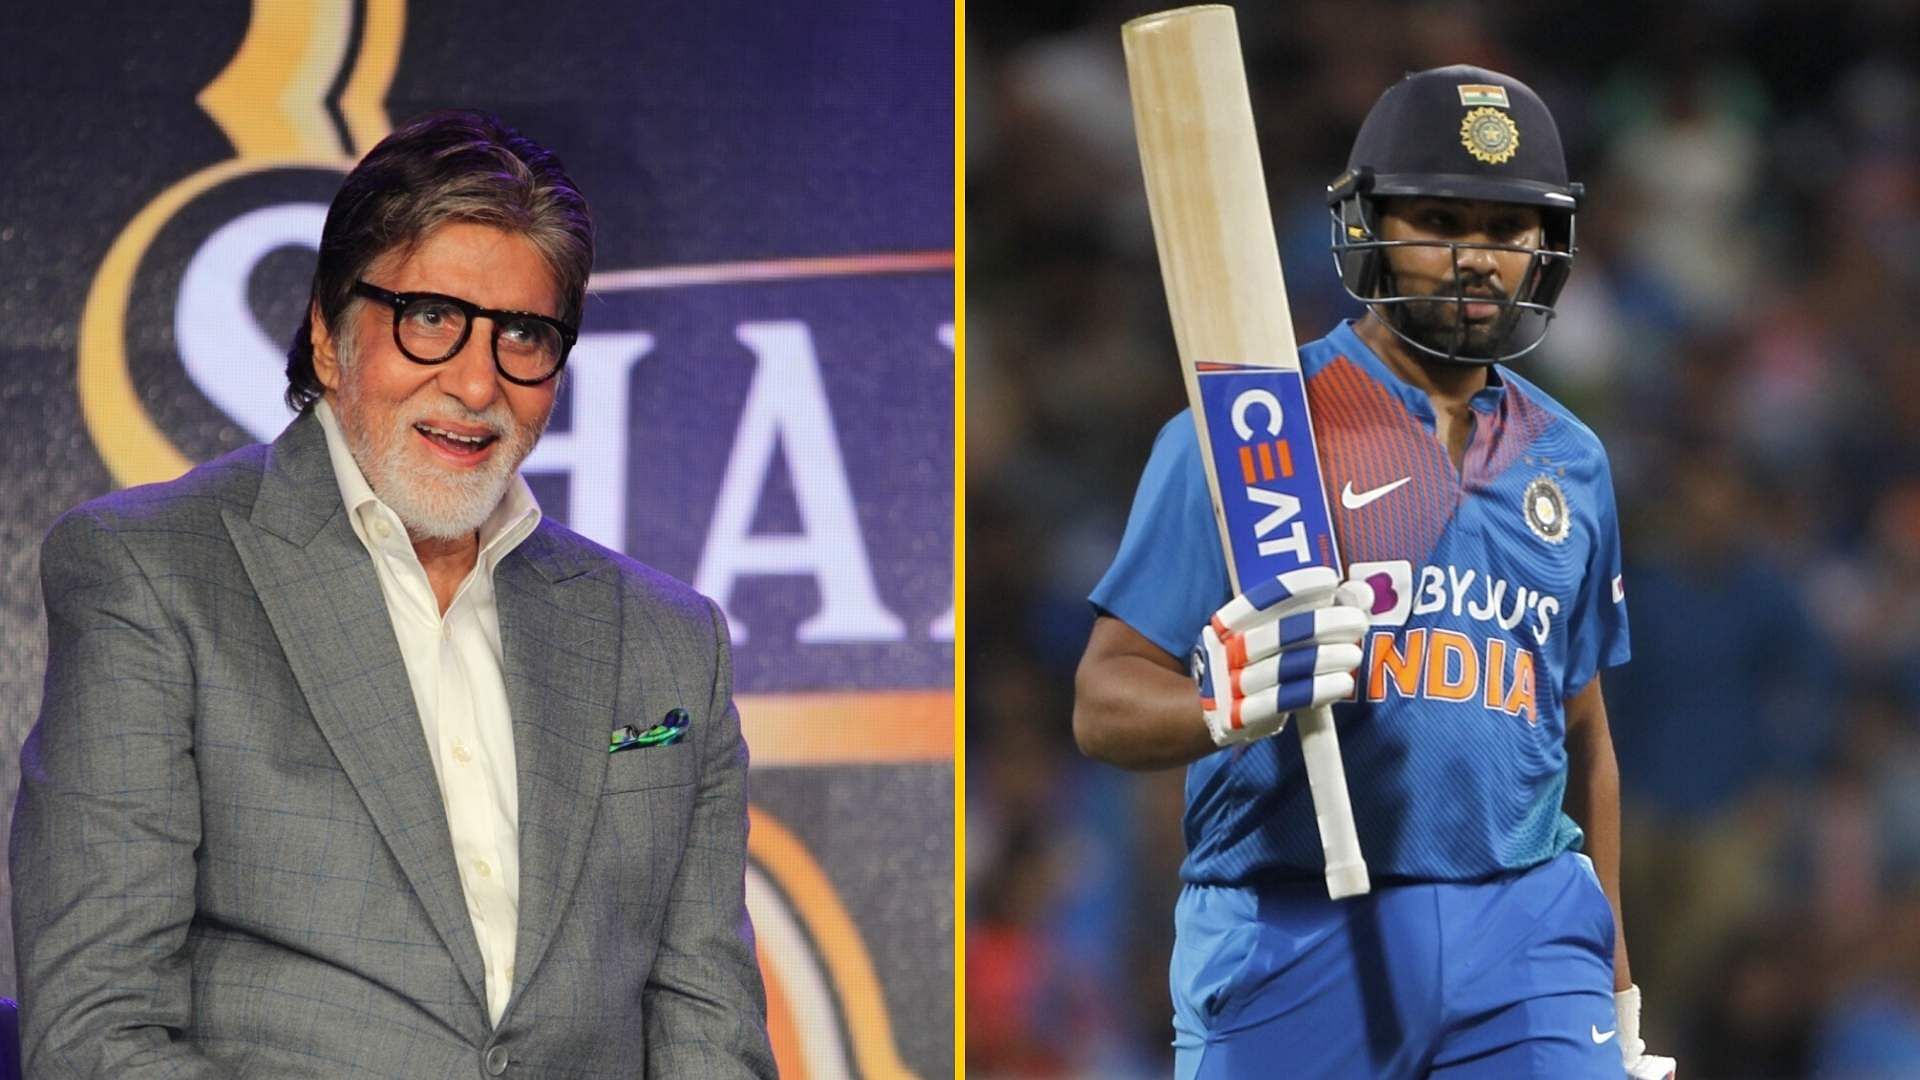 Amitabh Bachchan congratulated Rohit Sharma and team India on their win in India’s maiden T20I series in New Zealand.